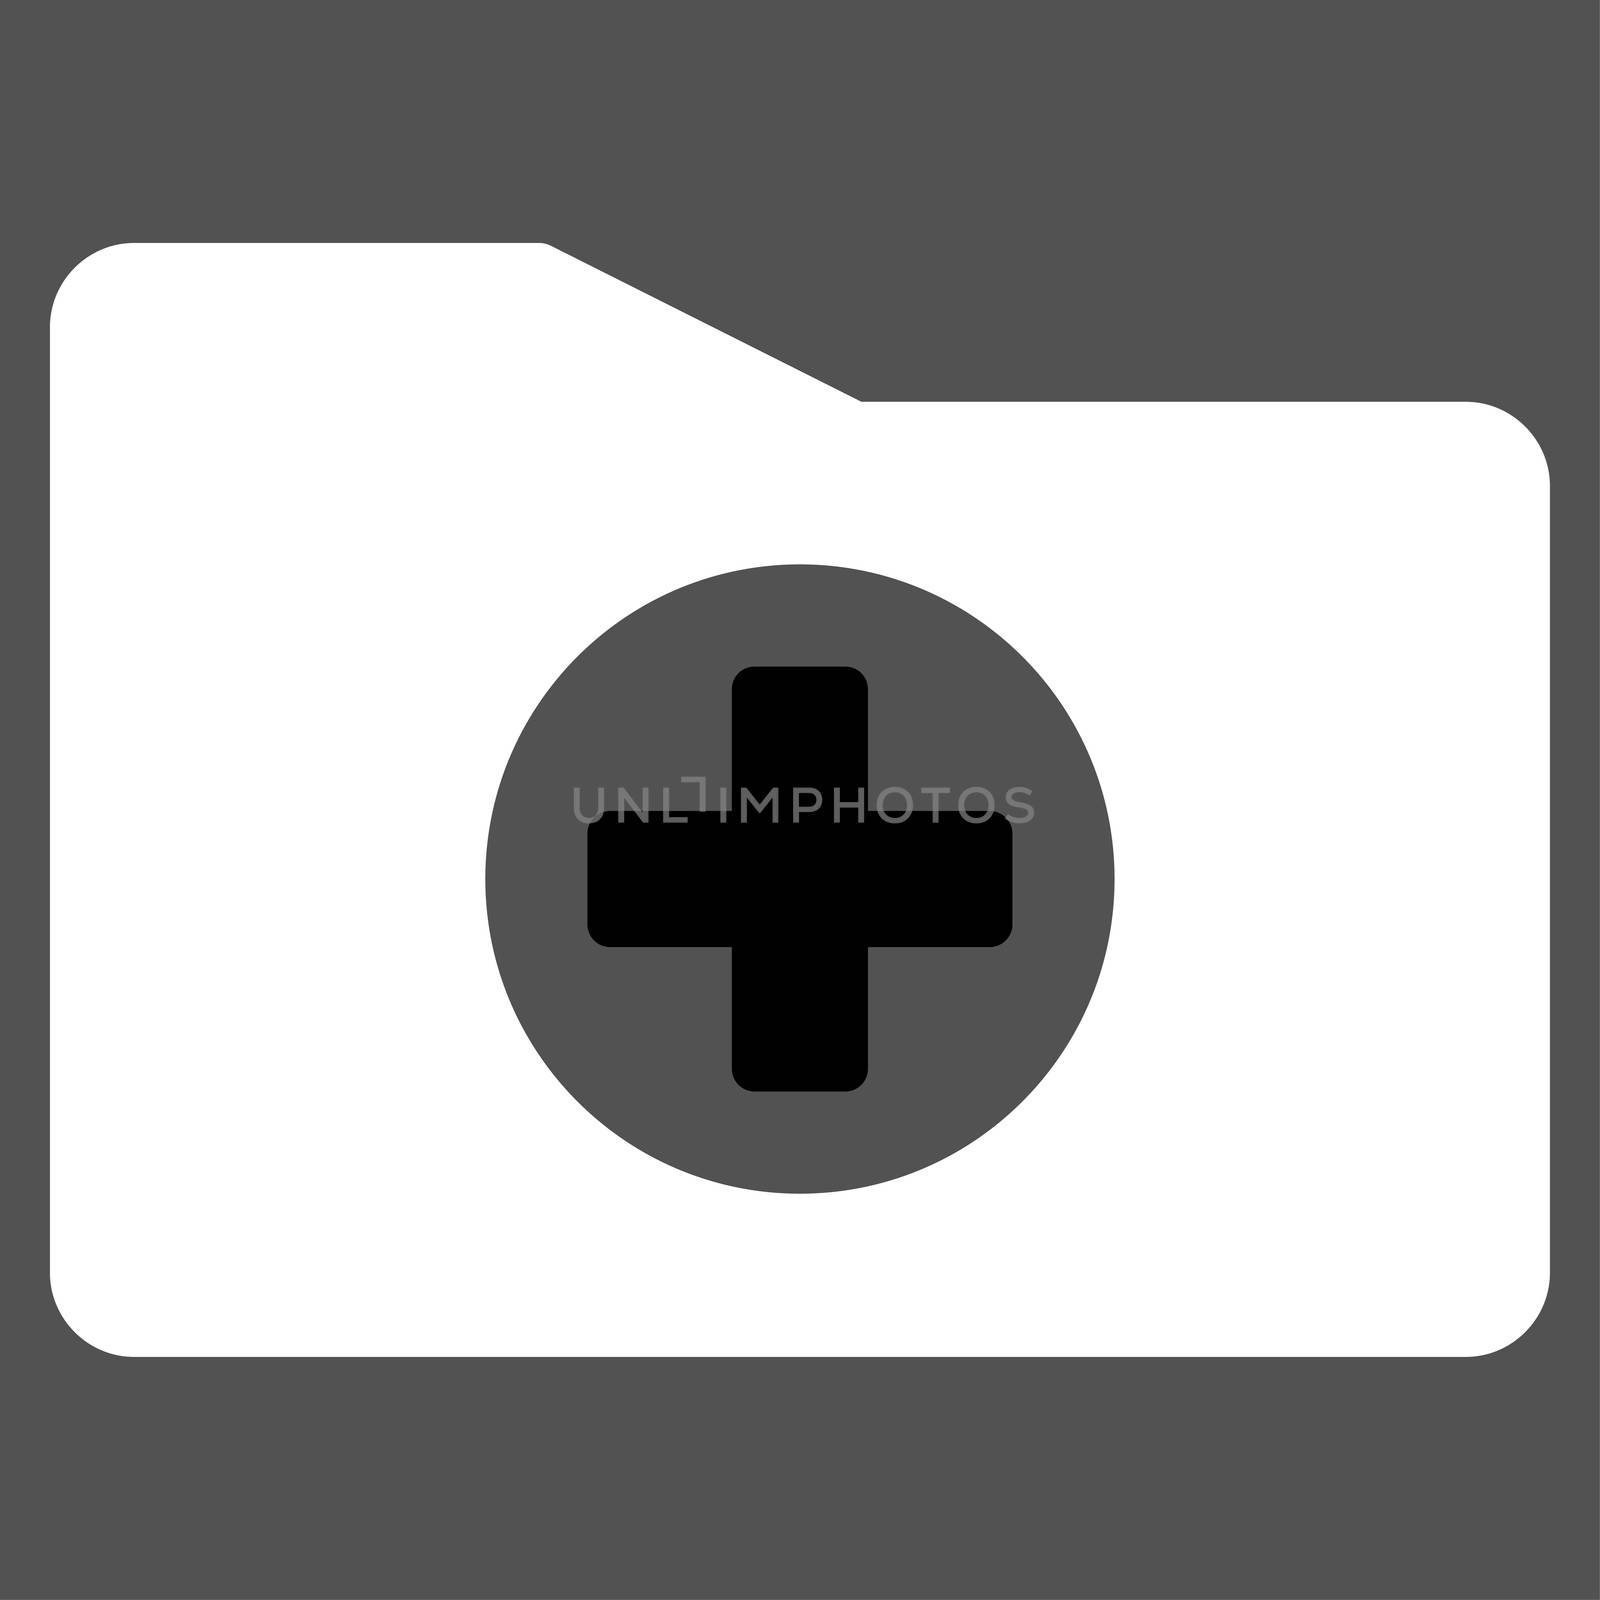 Medical Folder raster icon. Style is bicolor flat symbol, black and white colors, rounded angles, gray background.